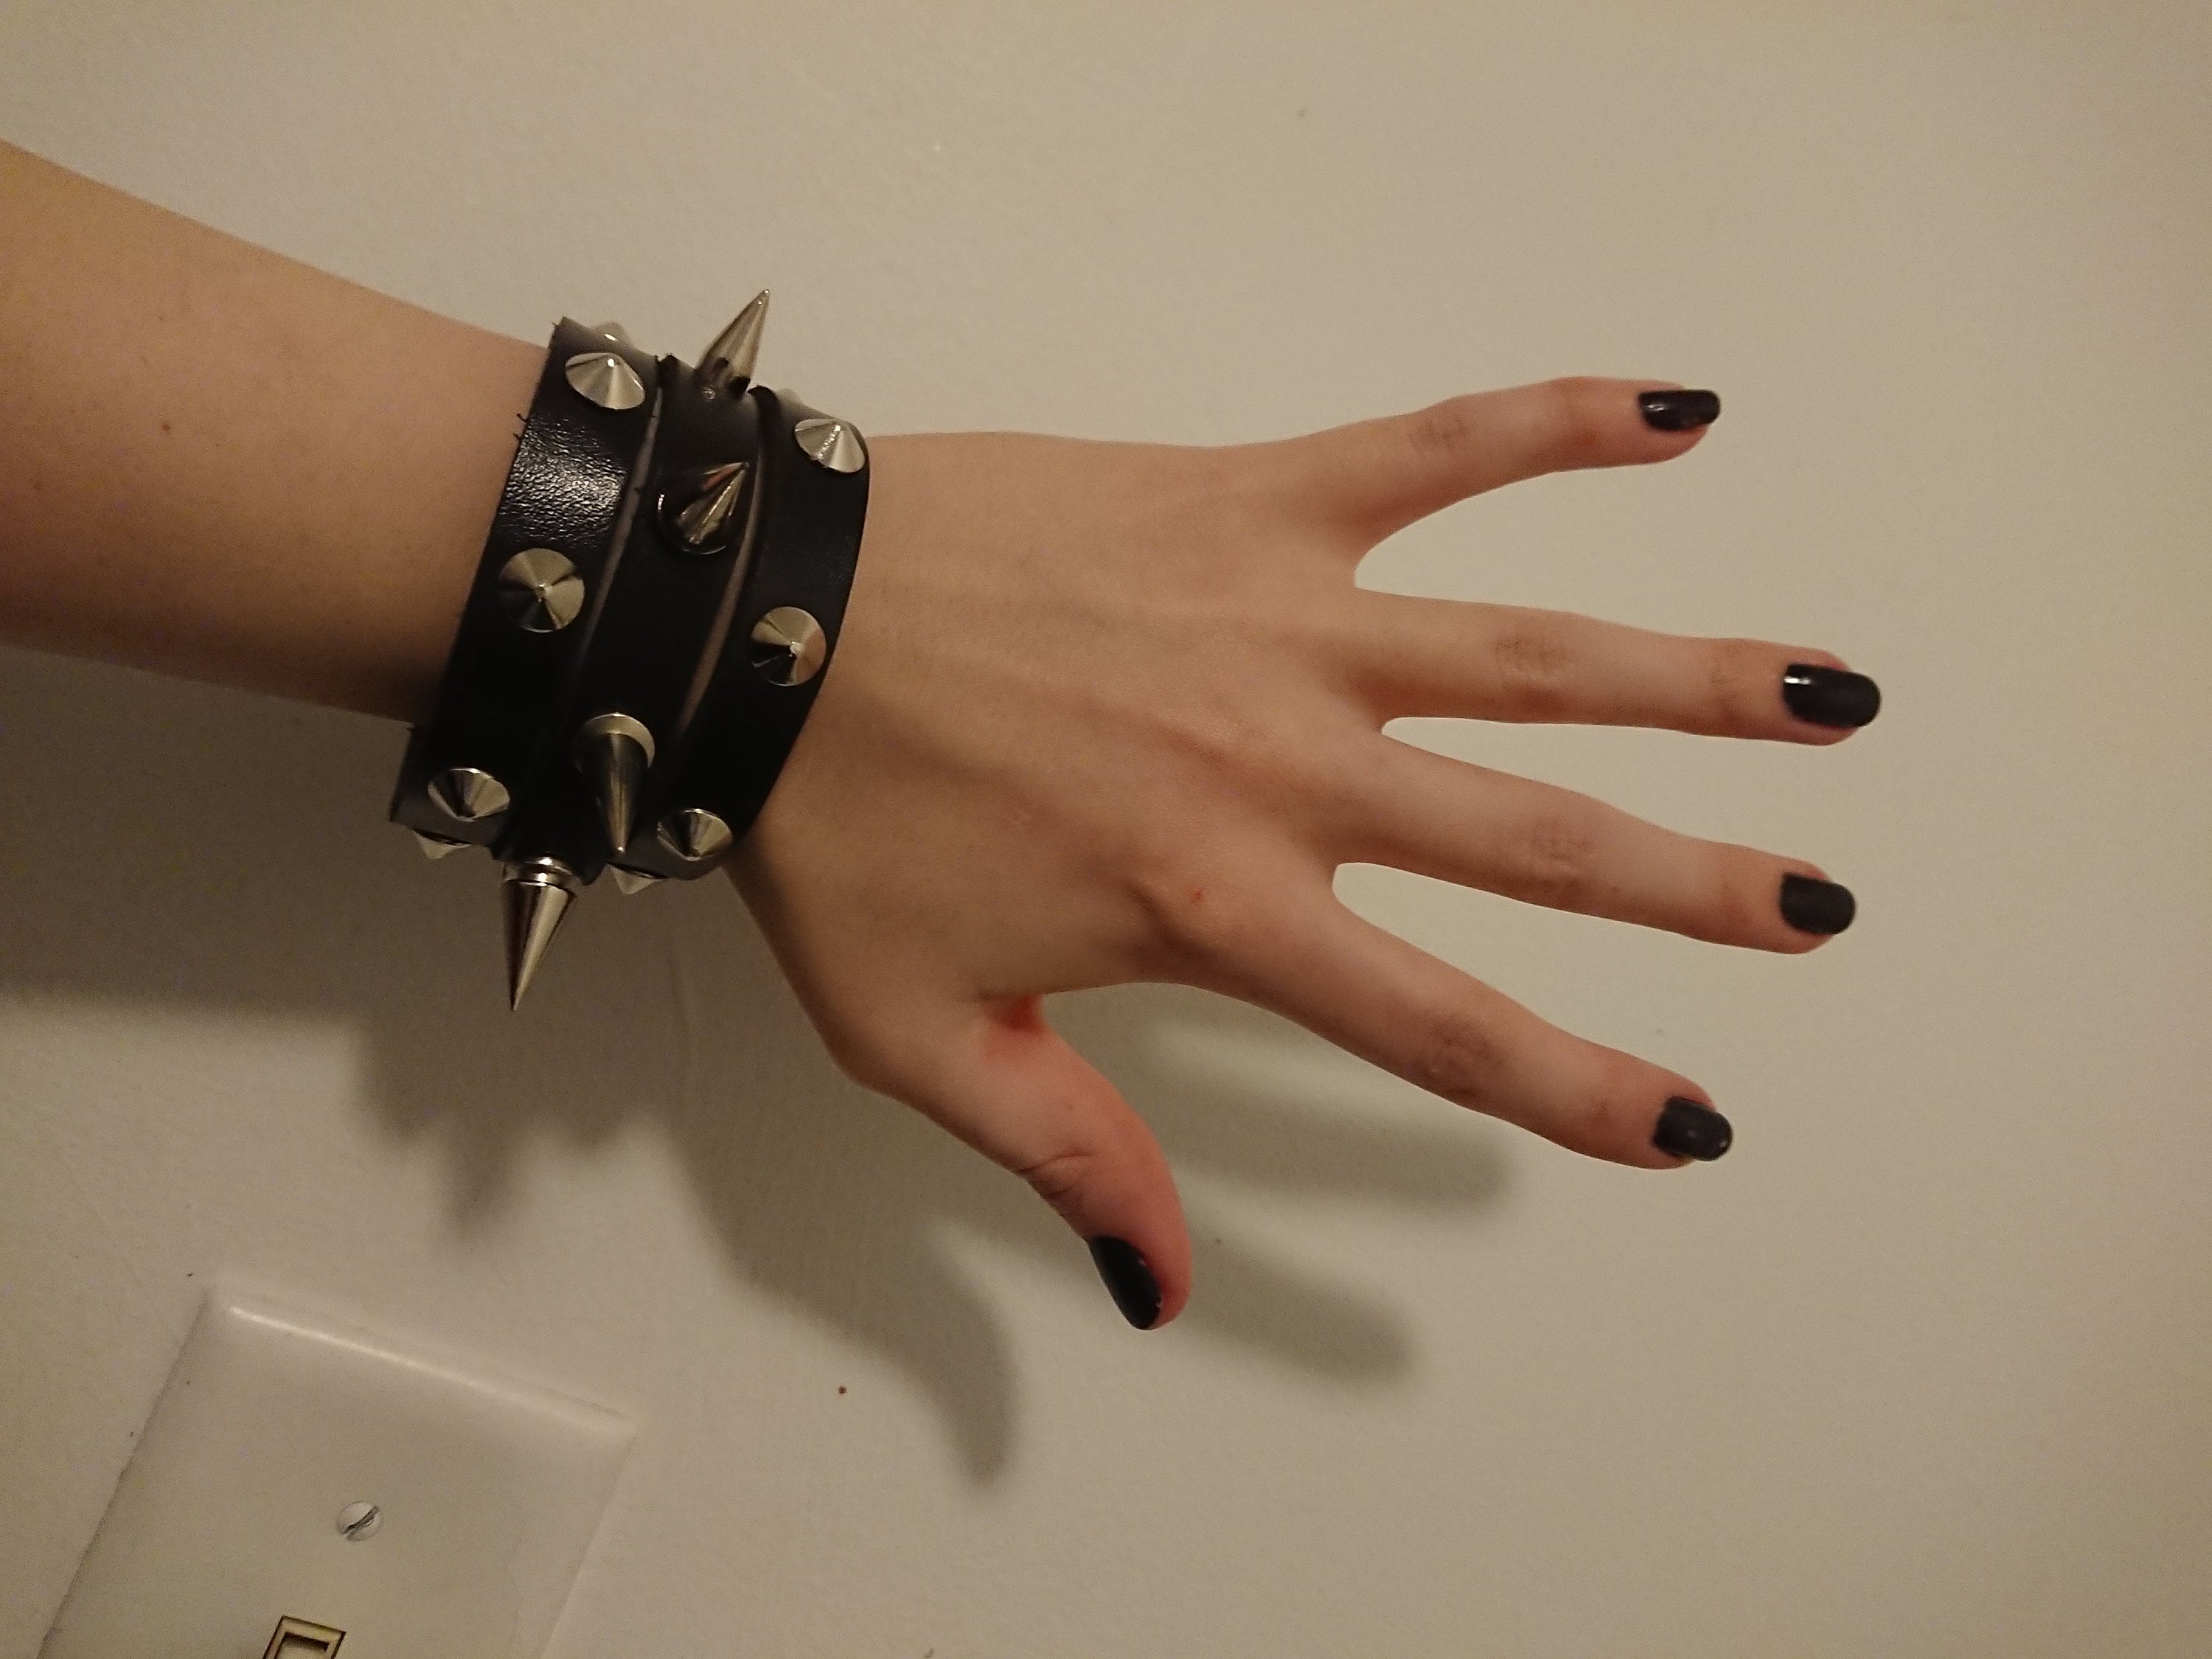 MILAKOO Goth Punk Accessories Leather Spike Studded Cosplay Costume Spike  Bracelet